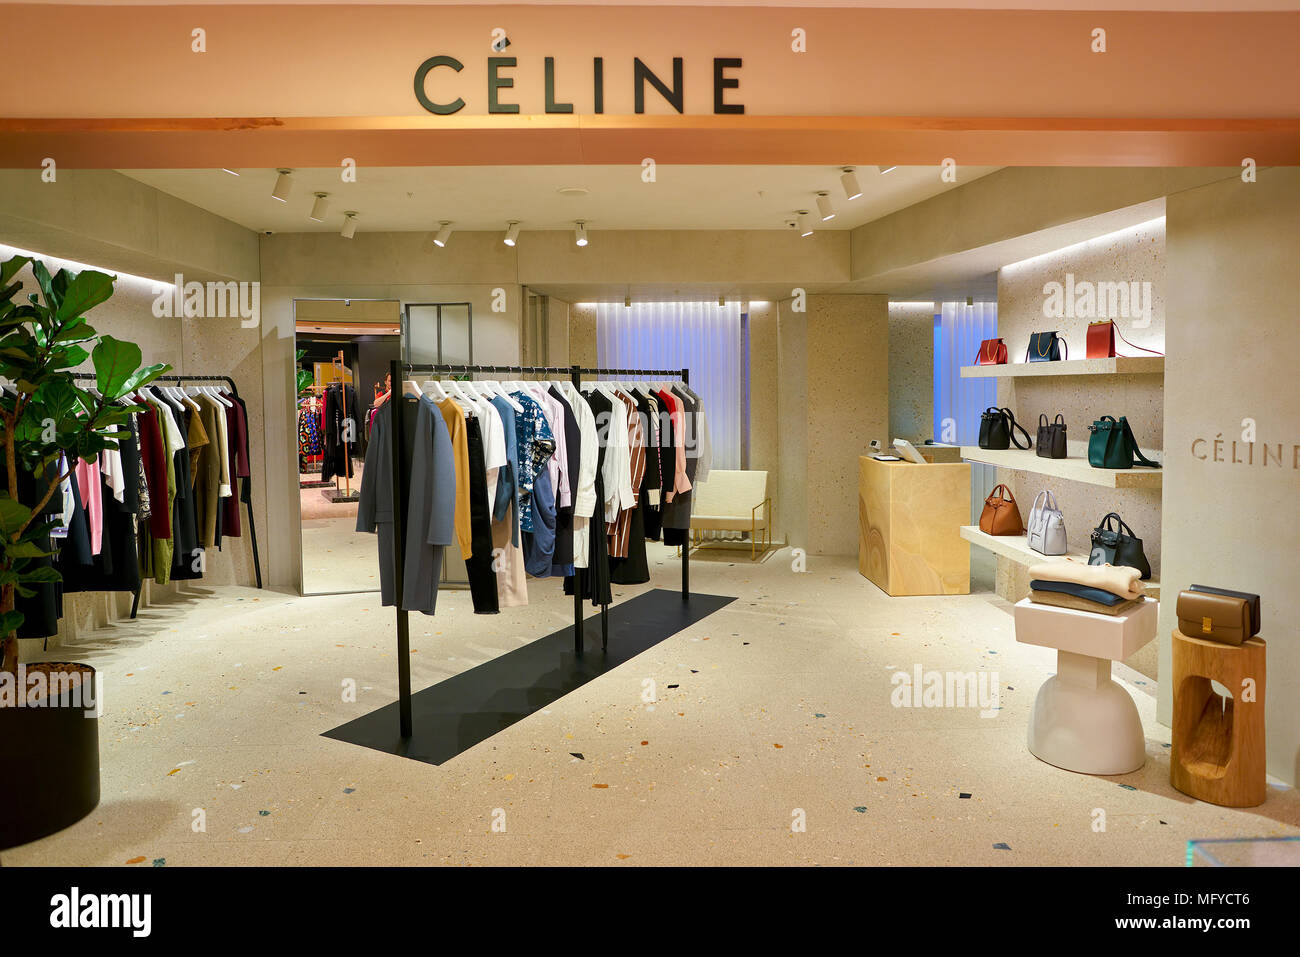 Celine Opens Its Newest Philippine Boutique at Solaire